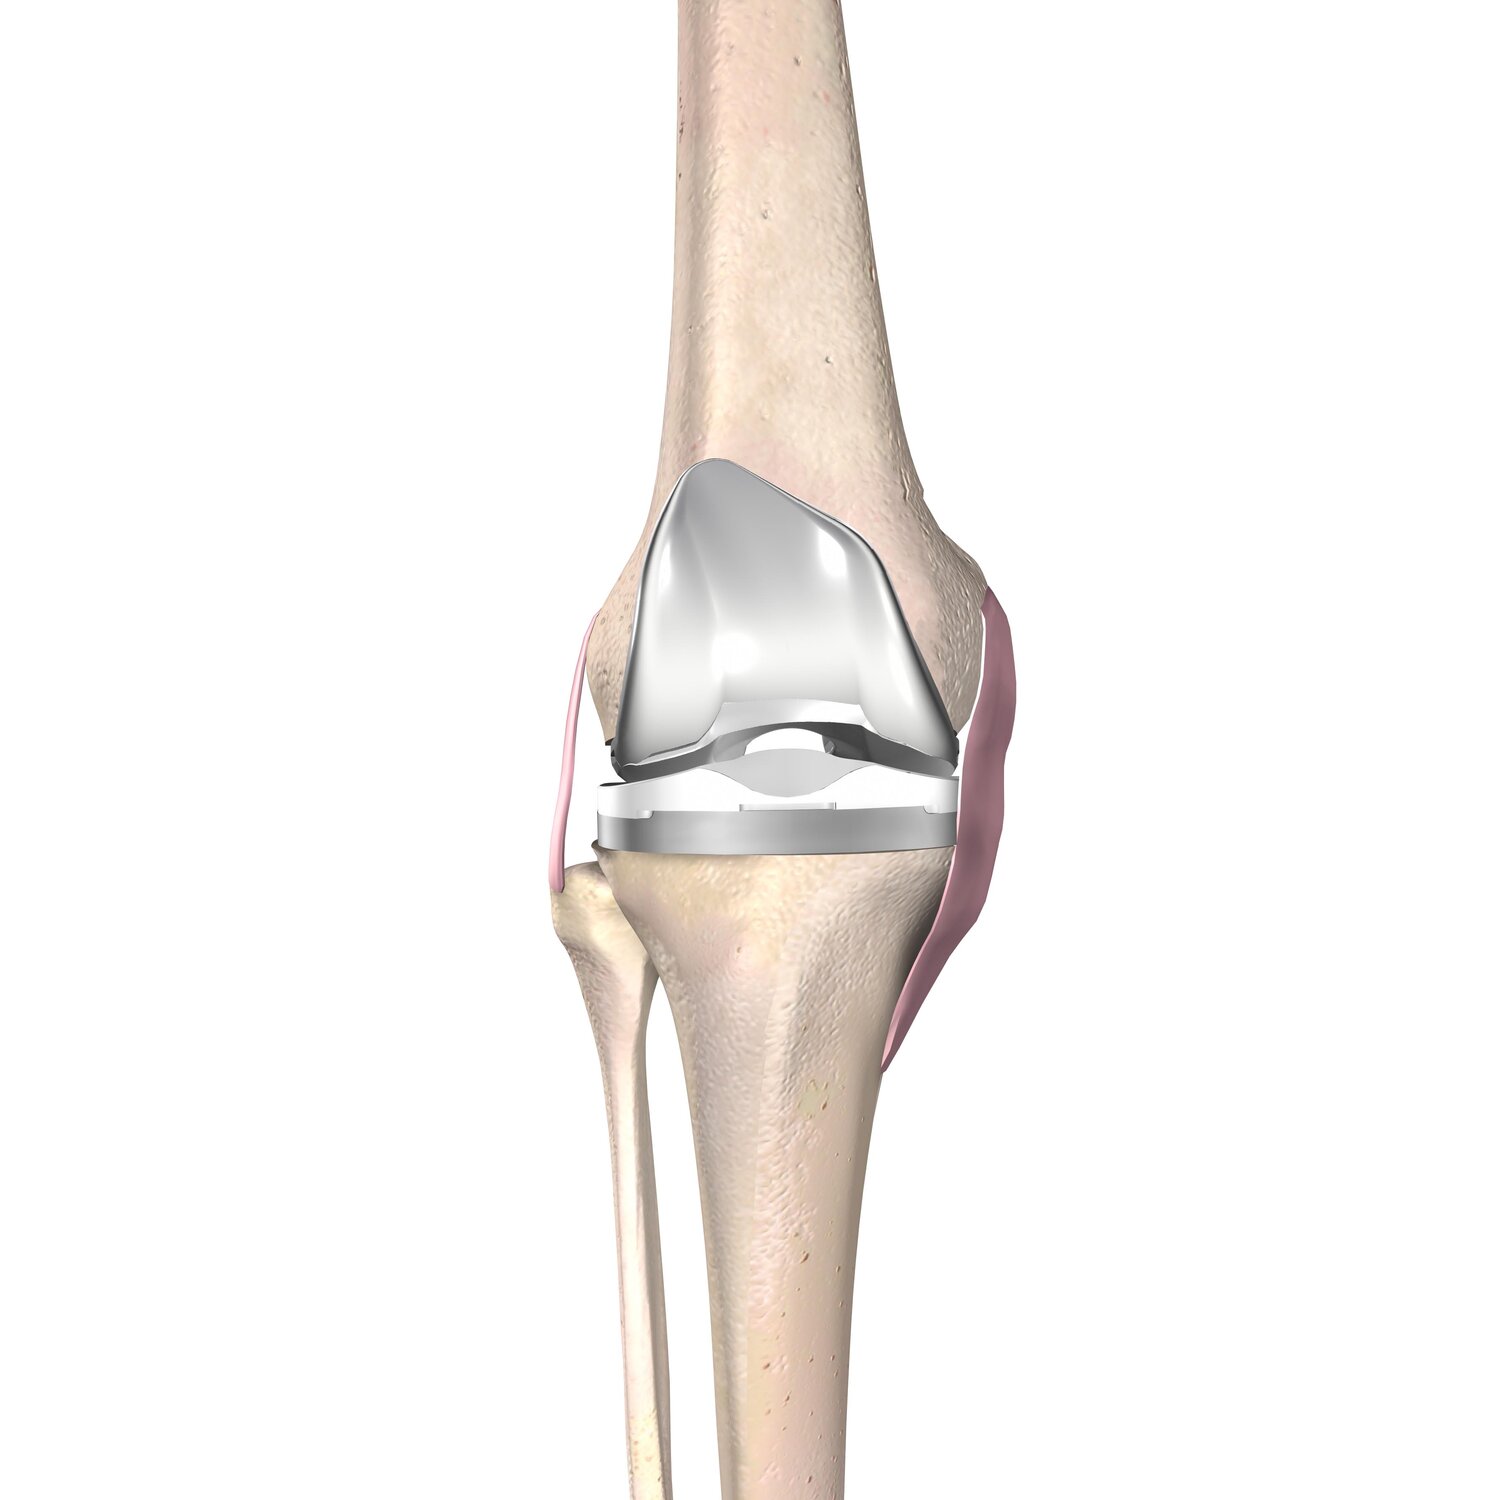 knee joint replacement devices